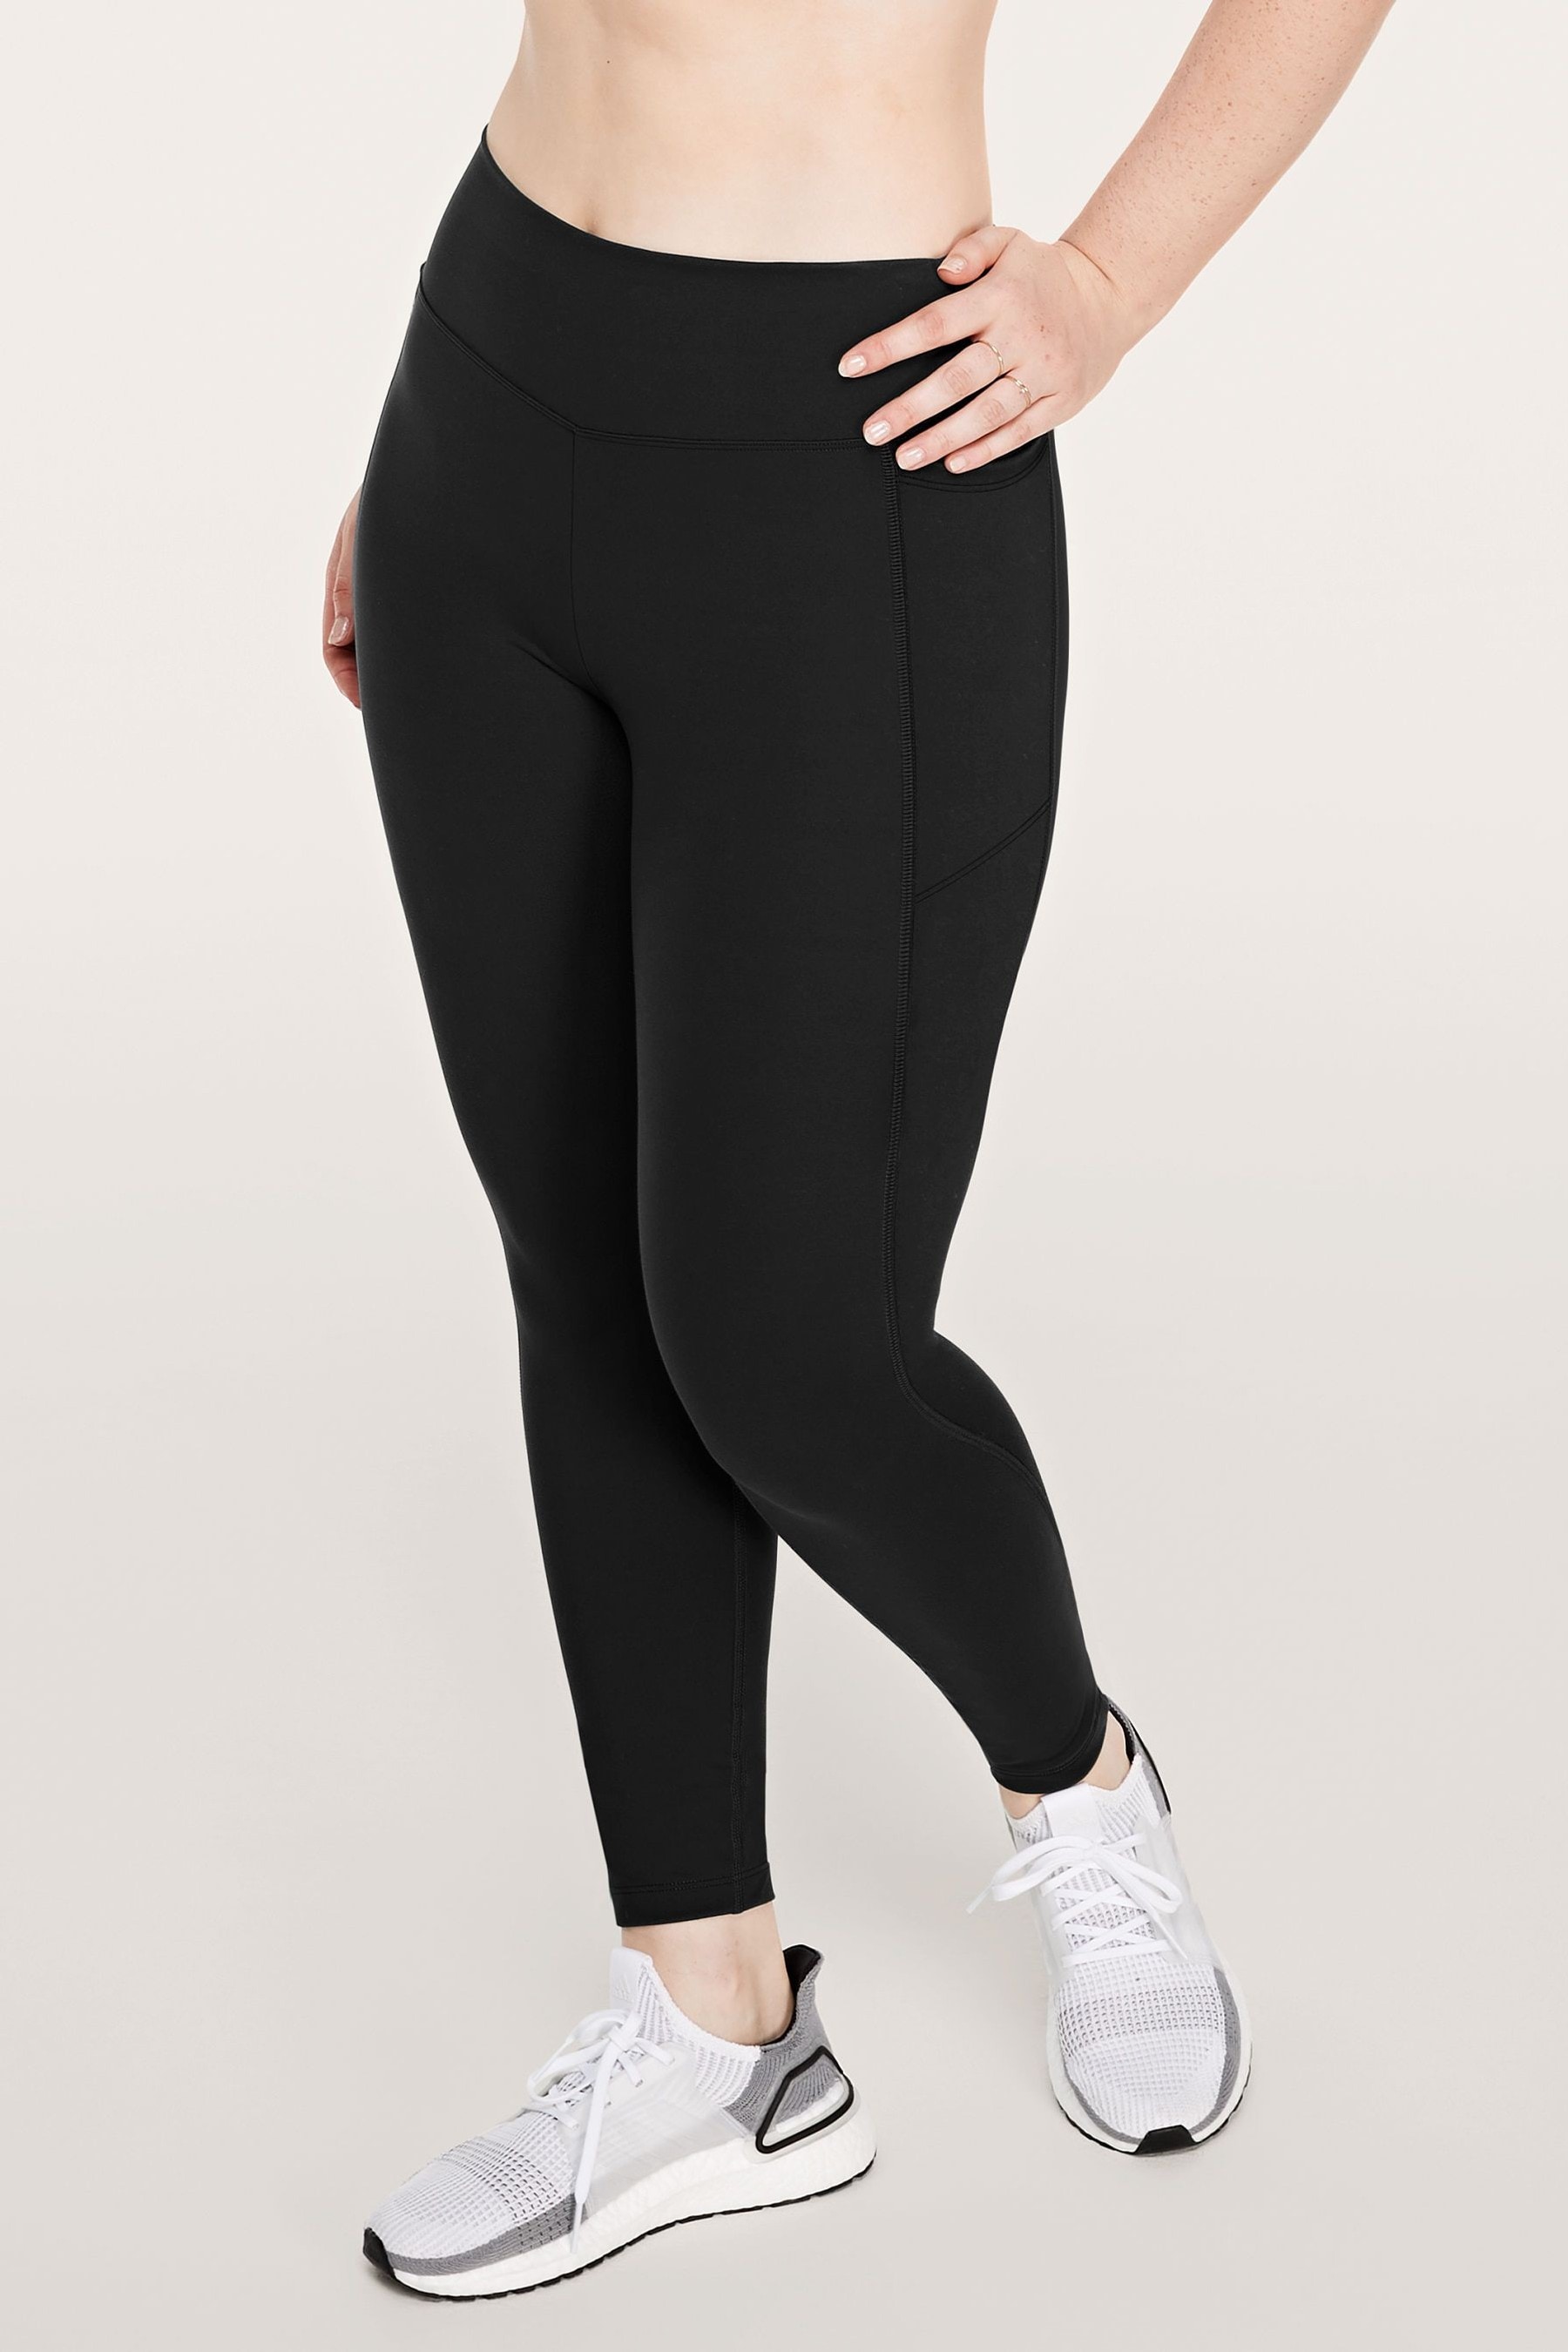 13 Best Fleece Lined Tights, Leggings For Winter | Checkout – Best Deals,  Expert Product Reviews & Buying Guides